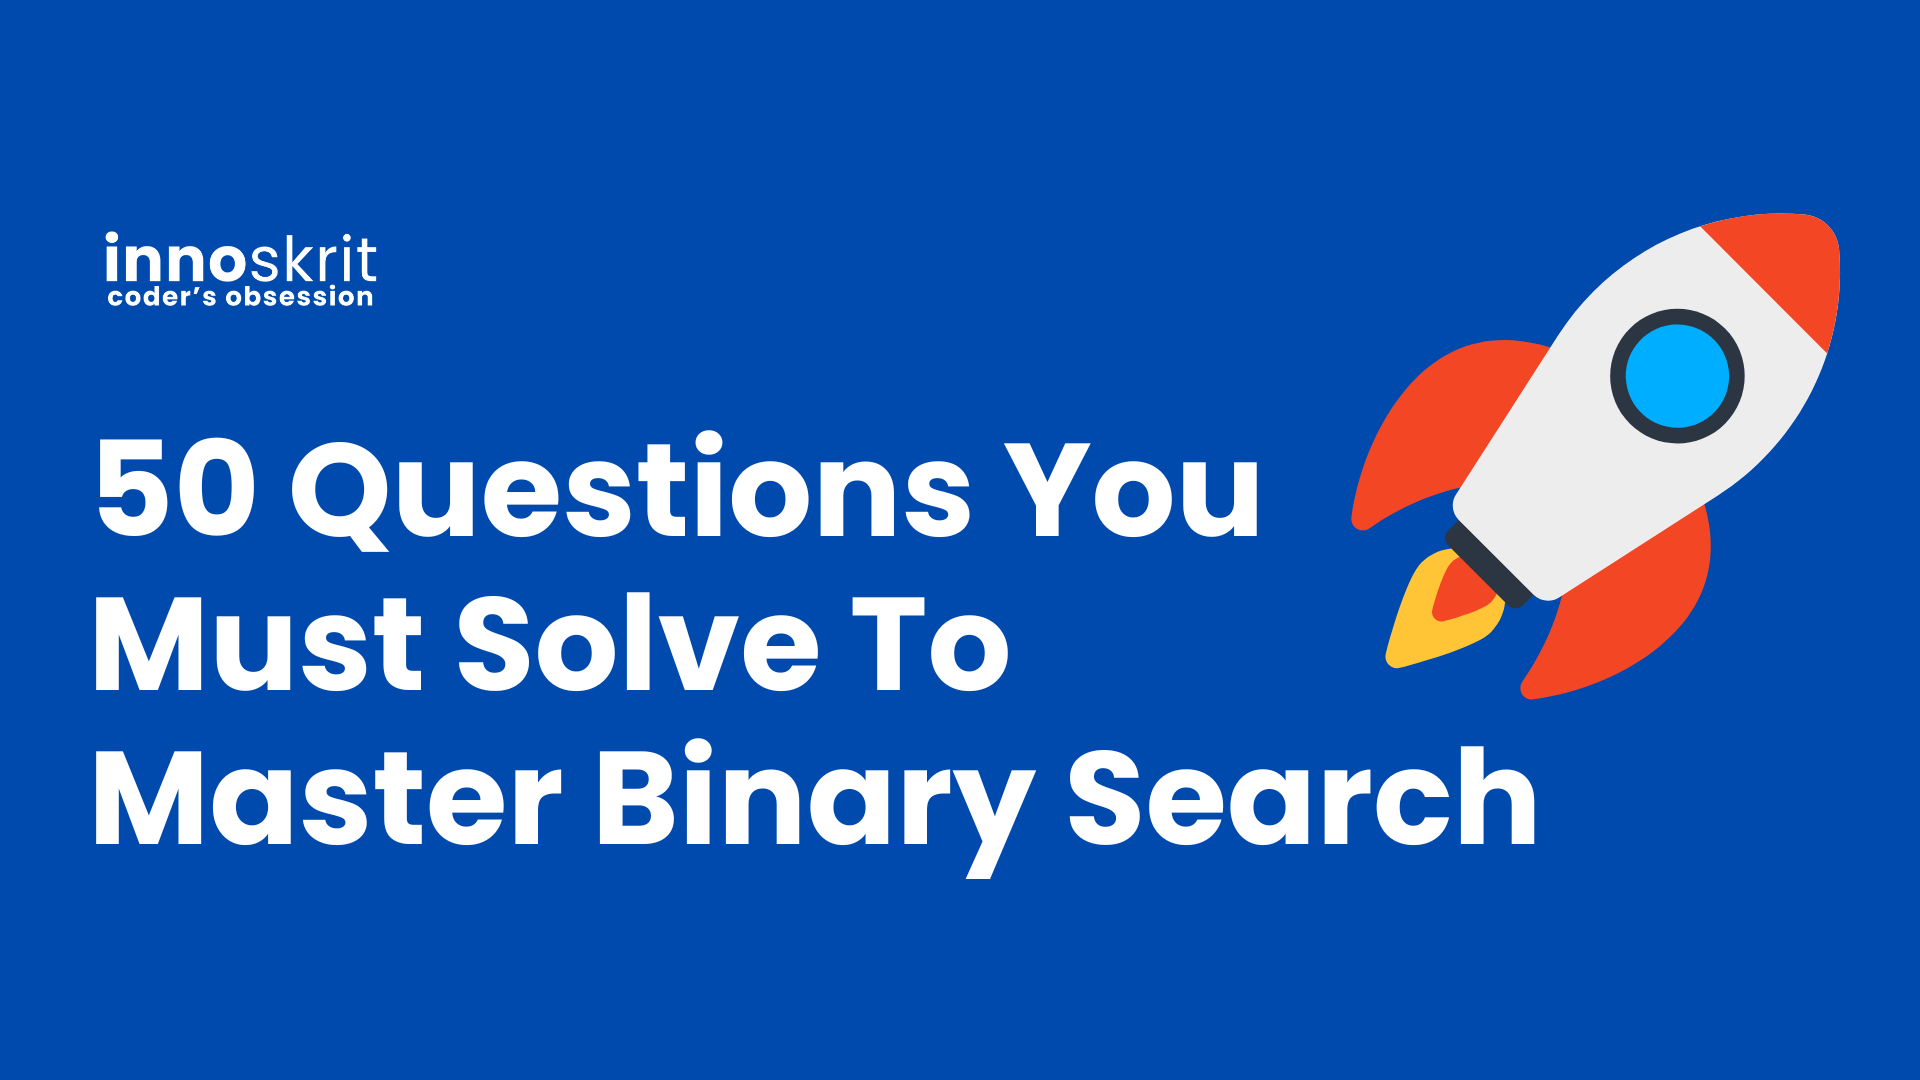 50 Questions You Must Solve To Master Binary Search By Google Software Engineer